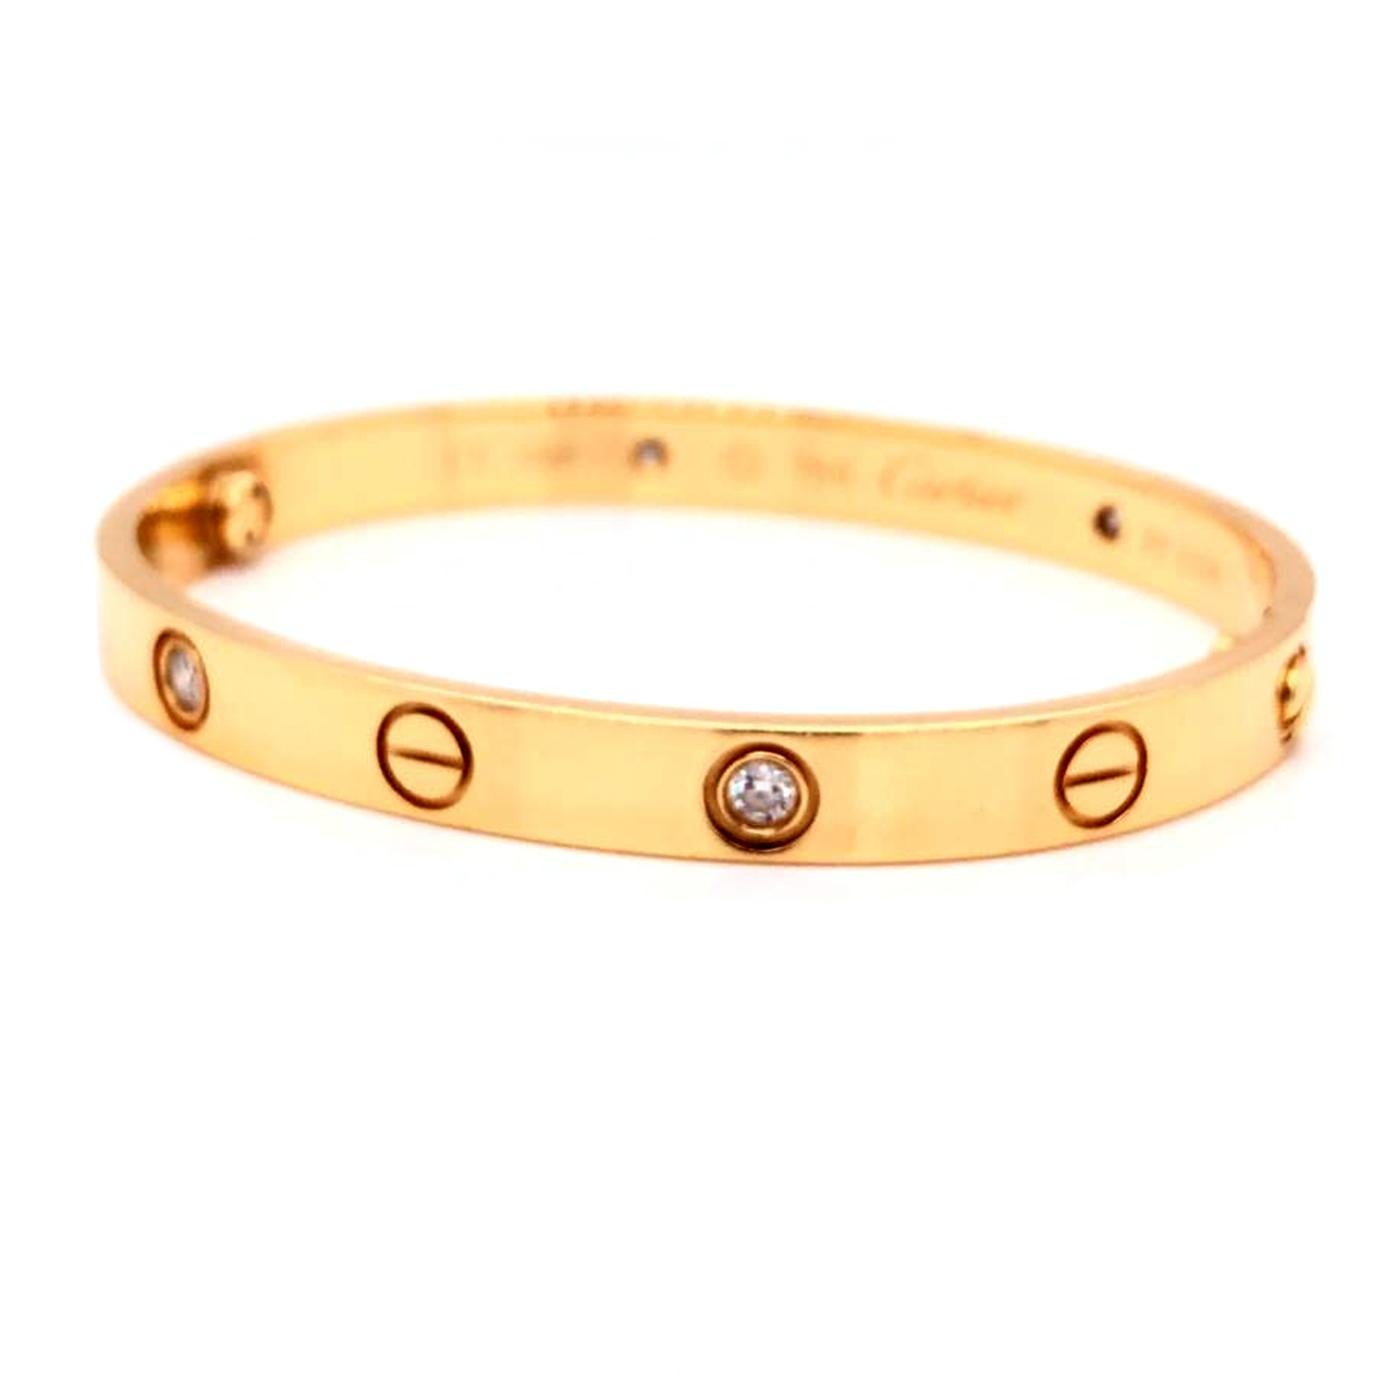 Description:
Love bracelet, 18K yellow gold, set with 4 brilliant-cut diamonds totaling 0.42 carats. Sold with a screwdriver. Width: 6.1mm.

About the Collection:
A child of 1970s New York, the LOVE collection remains today an iconic symbol of love